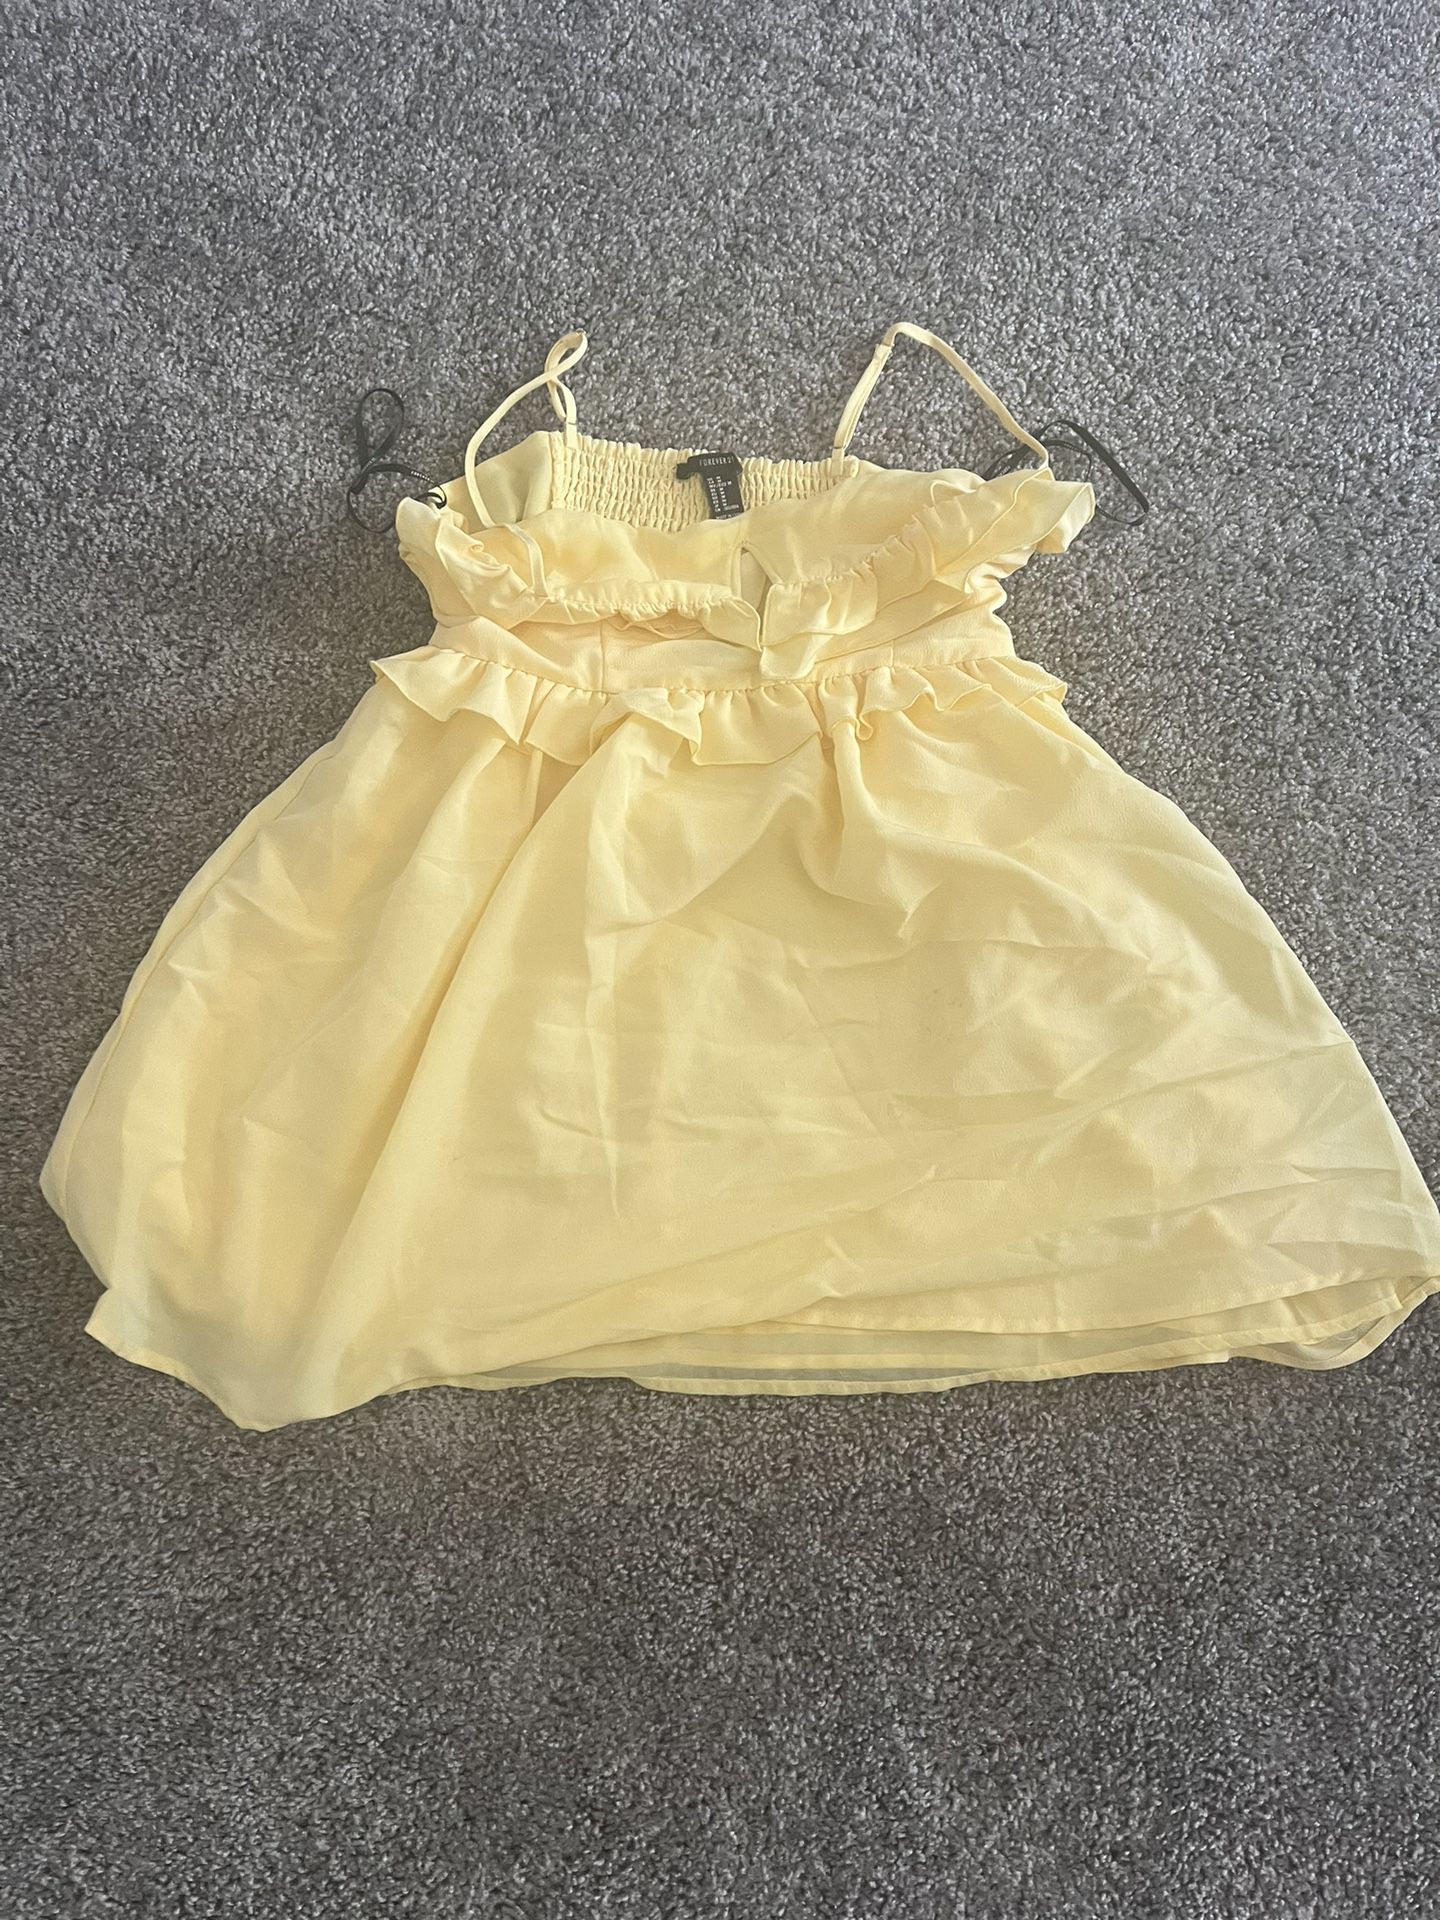 Forever 21 Yellow Dress